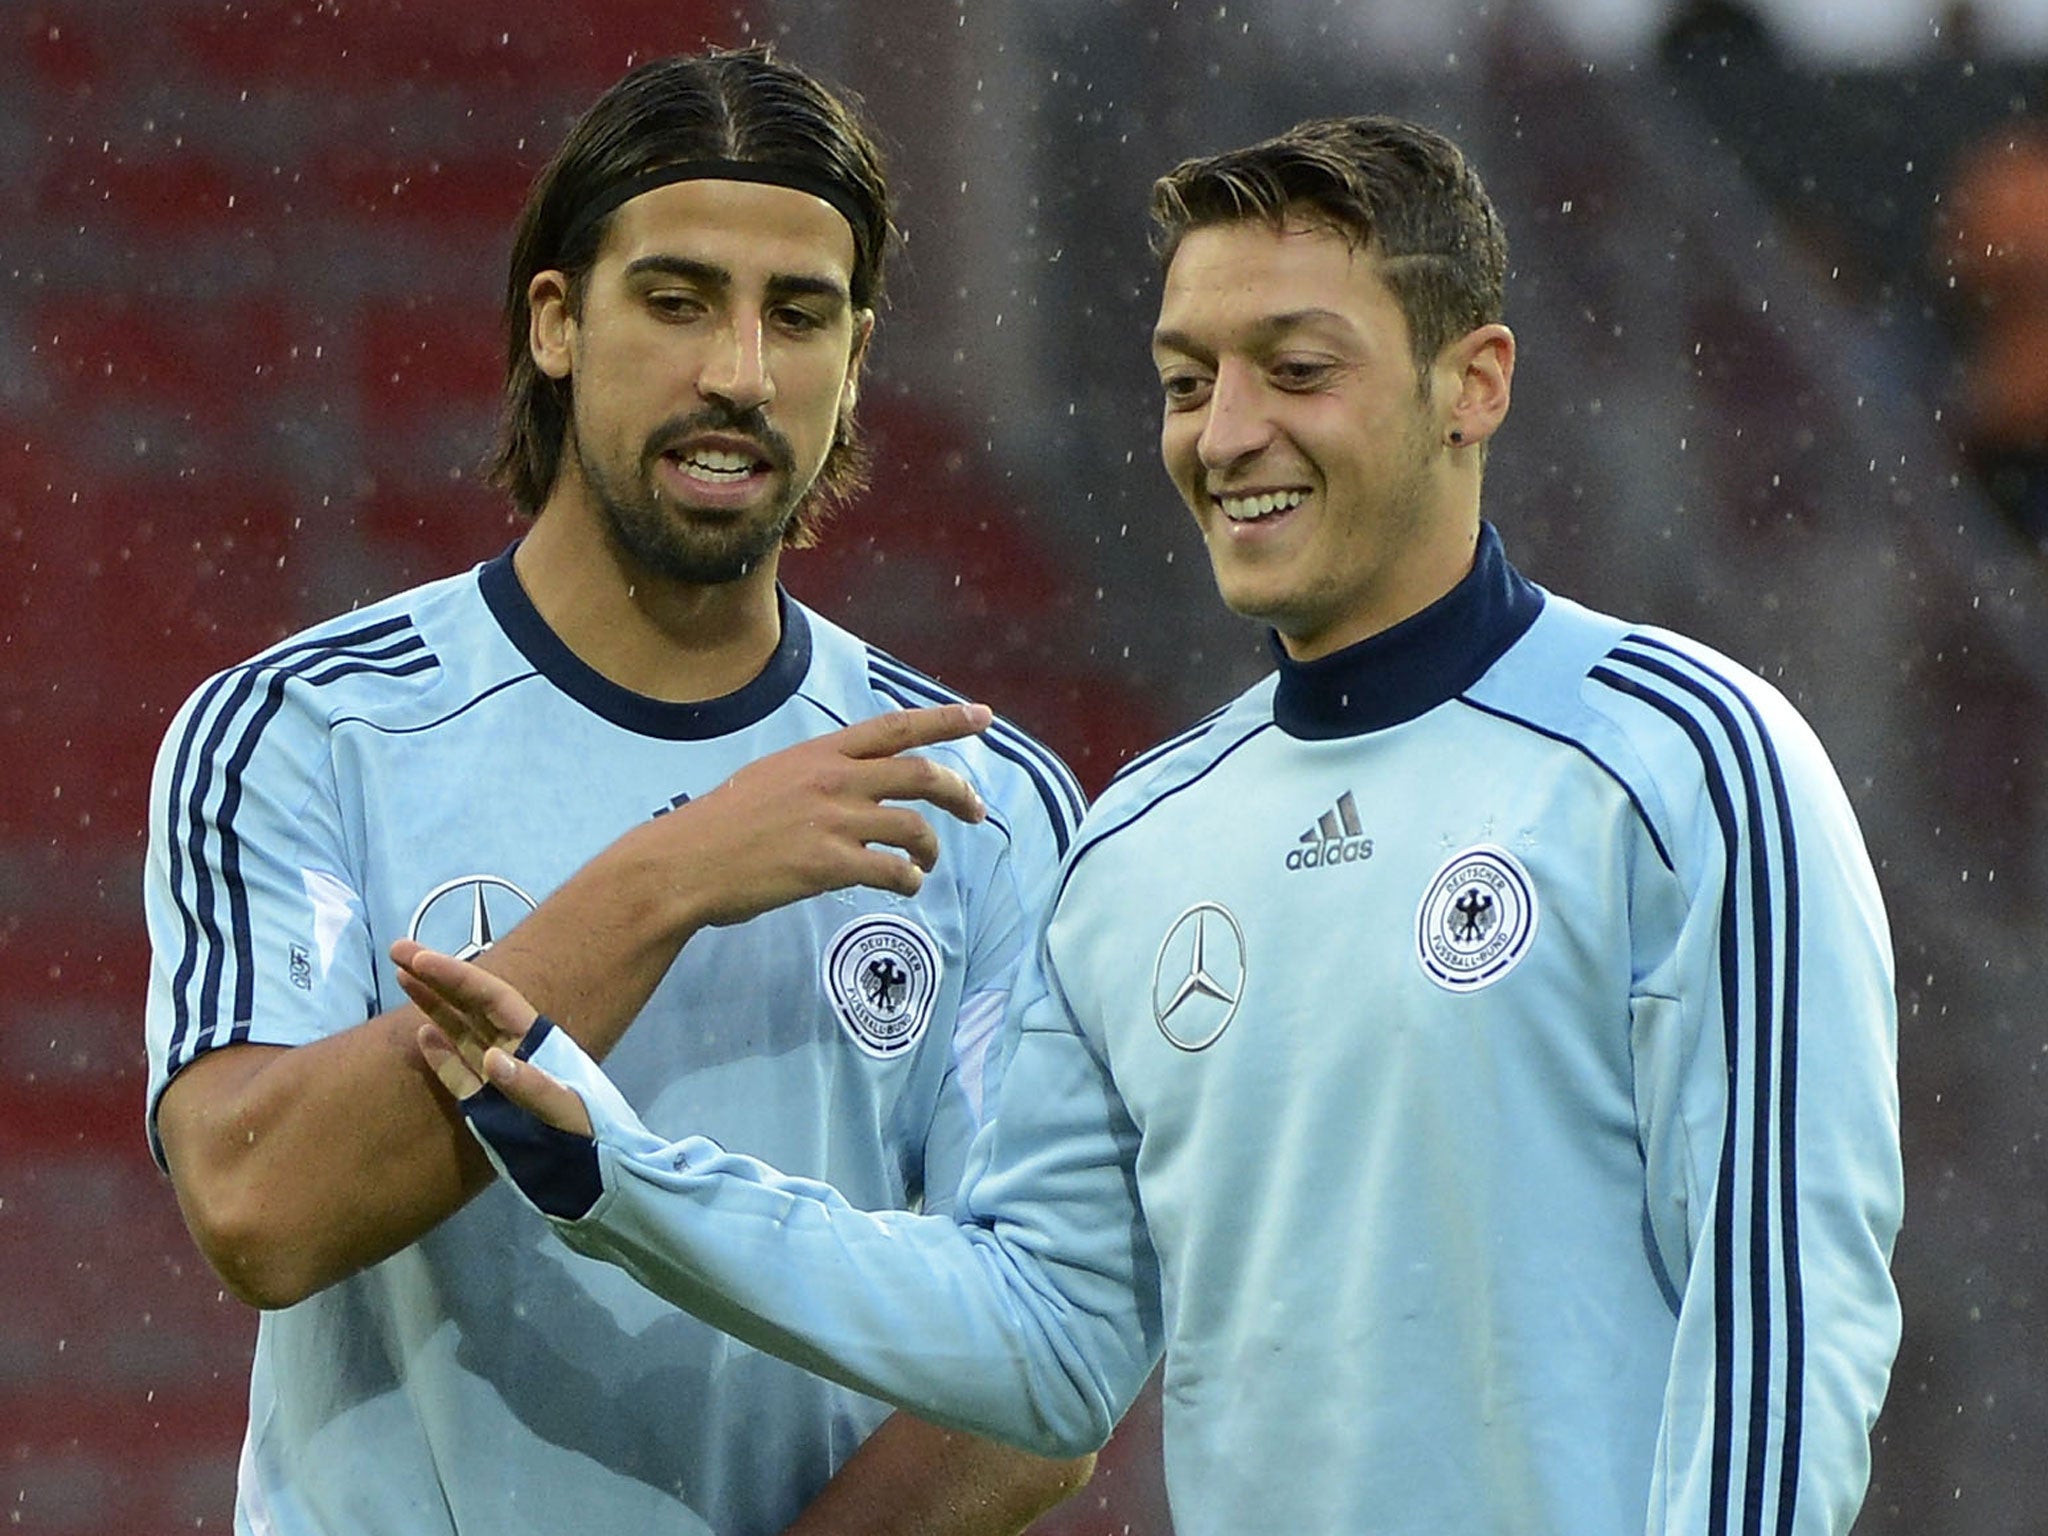 Sami Khedira (left) and Mesut Ozil (right) in conversation during training with Germany in August